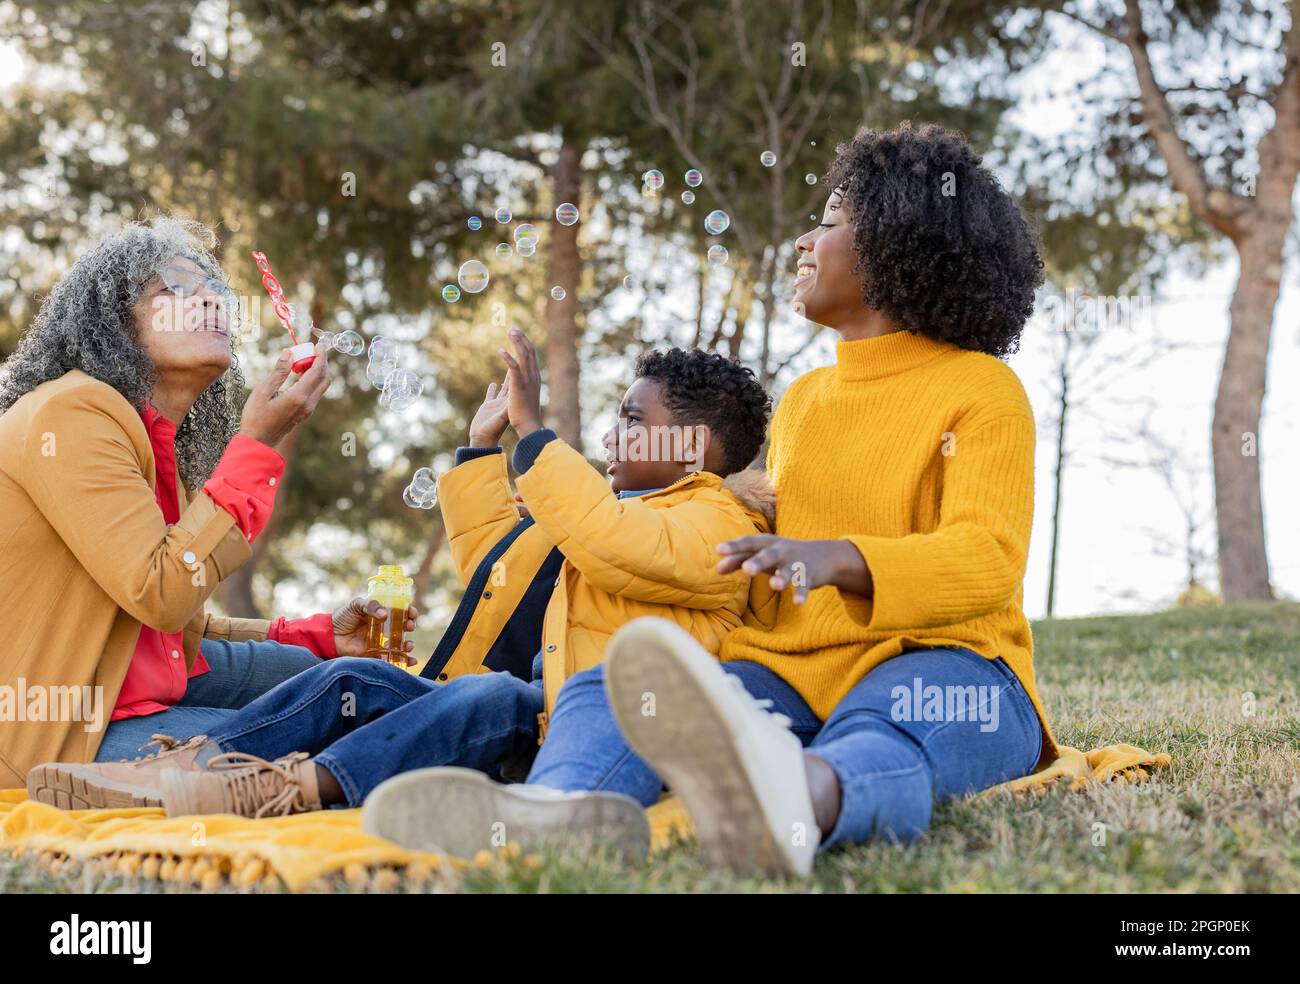 Family spending leisure time together in park Stock Photo